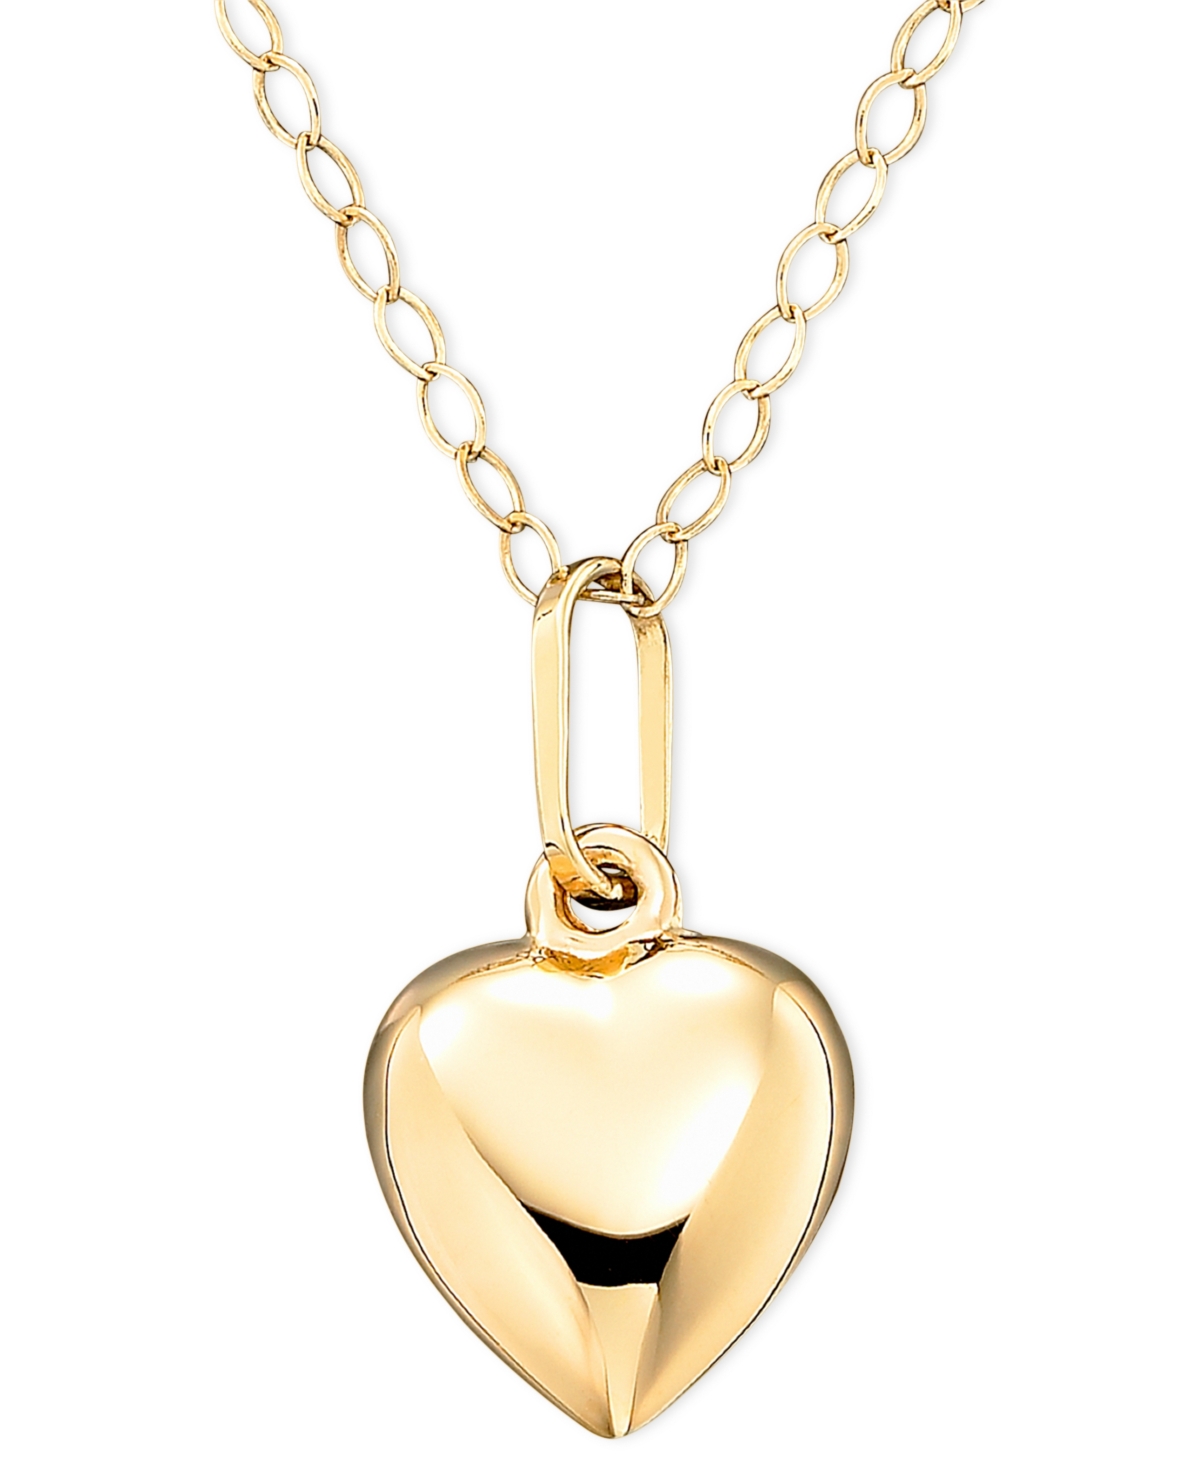 18k Solid Yellow Gold Heart Shaped Pendant for Necklace for Children and Girls 